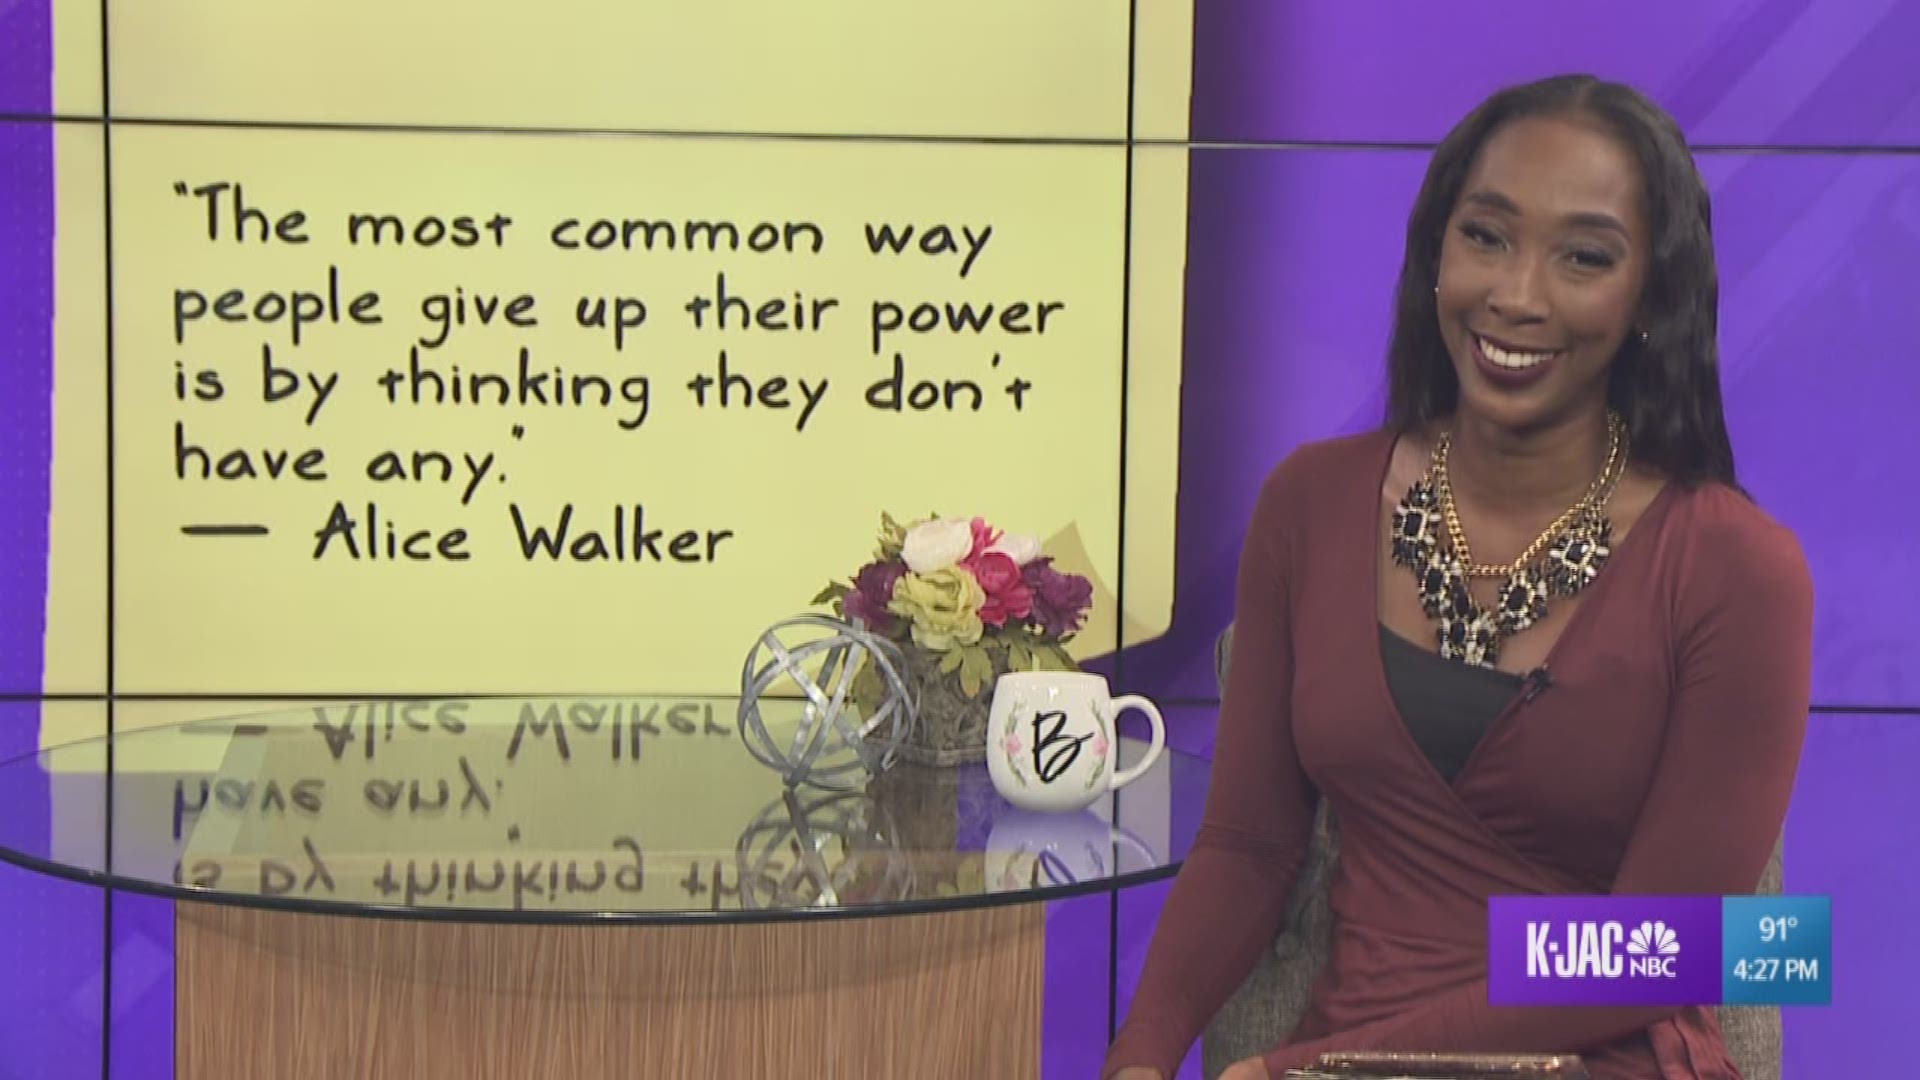 “The most common way people give up their power is by thinking they don’t have any.” — Alice Walker